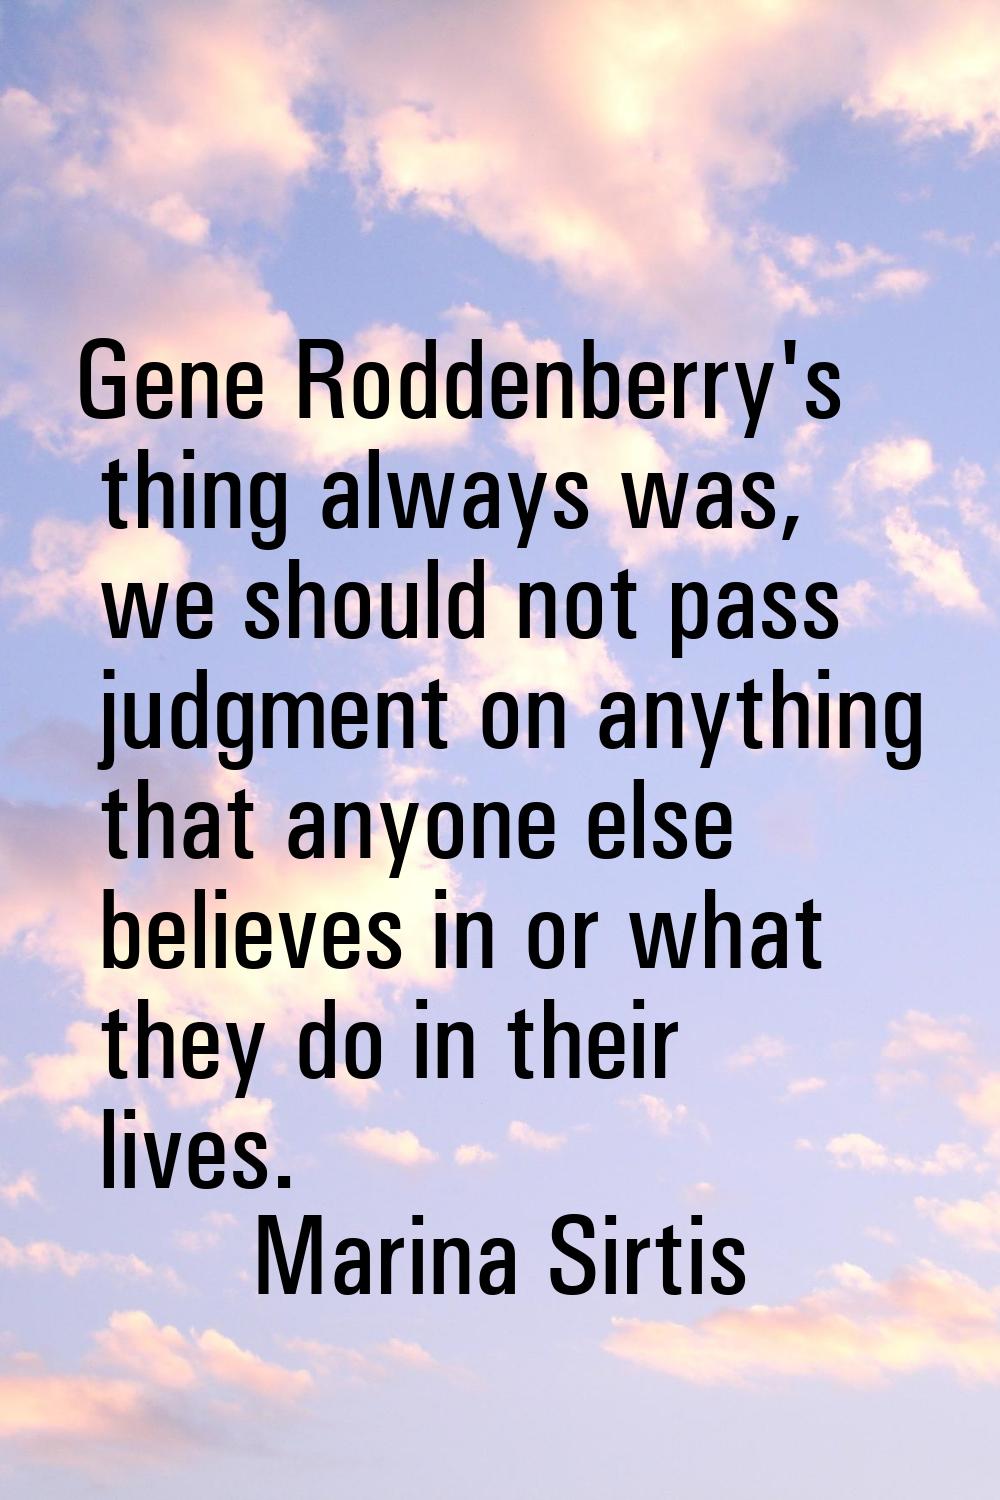 Gene Roddenberry's thing always was, we should not pass judgment on anything that anyone else belie